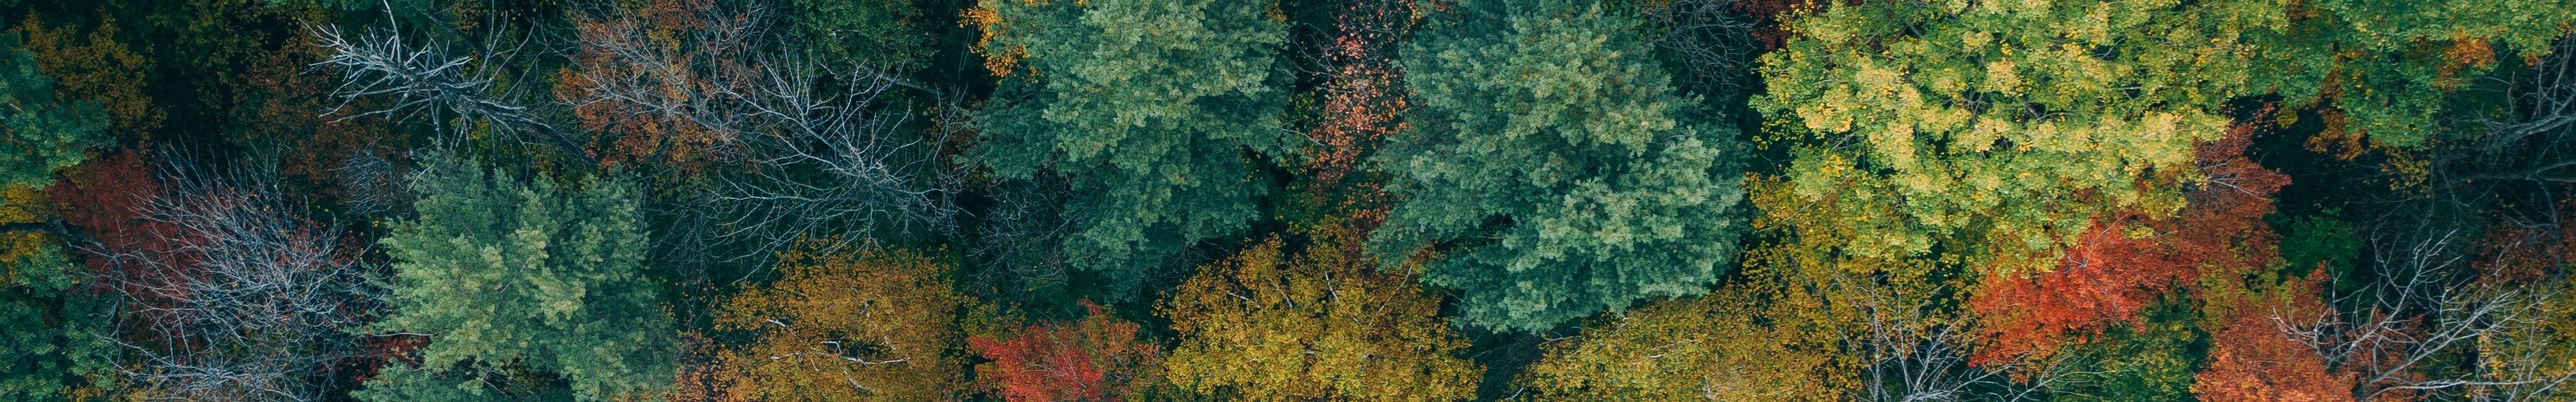 Stock Image Aerial View Over North Carolina Woods with Green Yellow and Orange Leaves